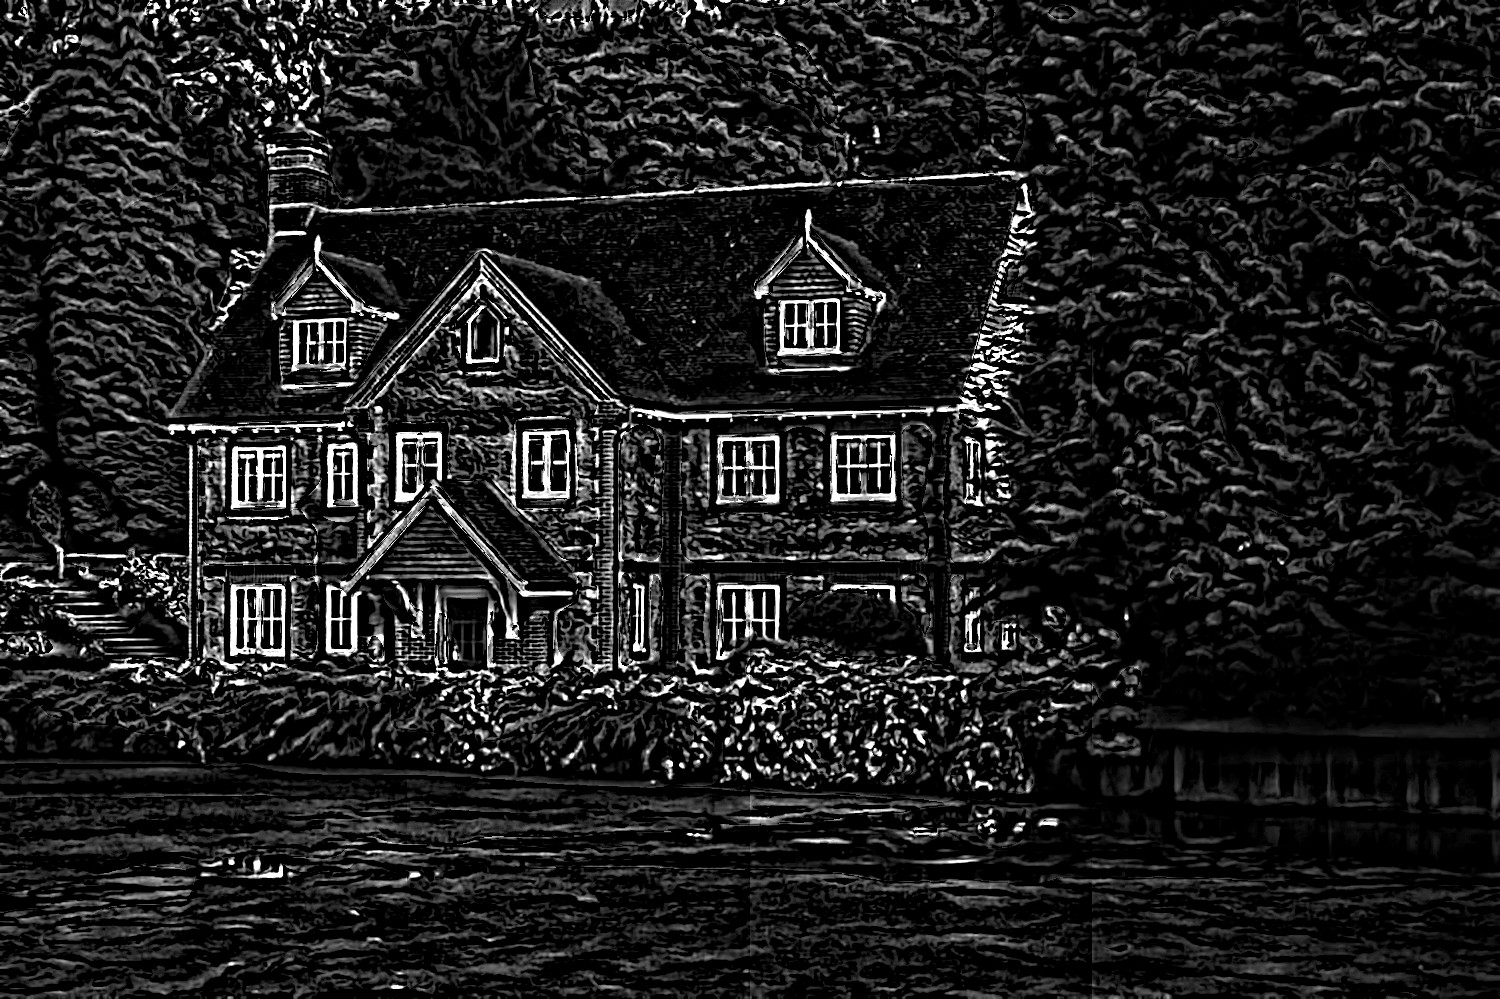 house_beside_a_lake_by_udochristmann_dc8j30t_DN_SoftColourPencilsOnBlack_Issa_.JPG